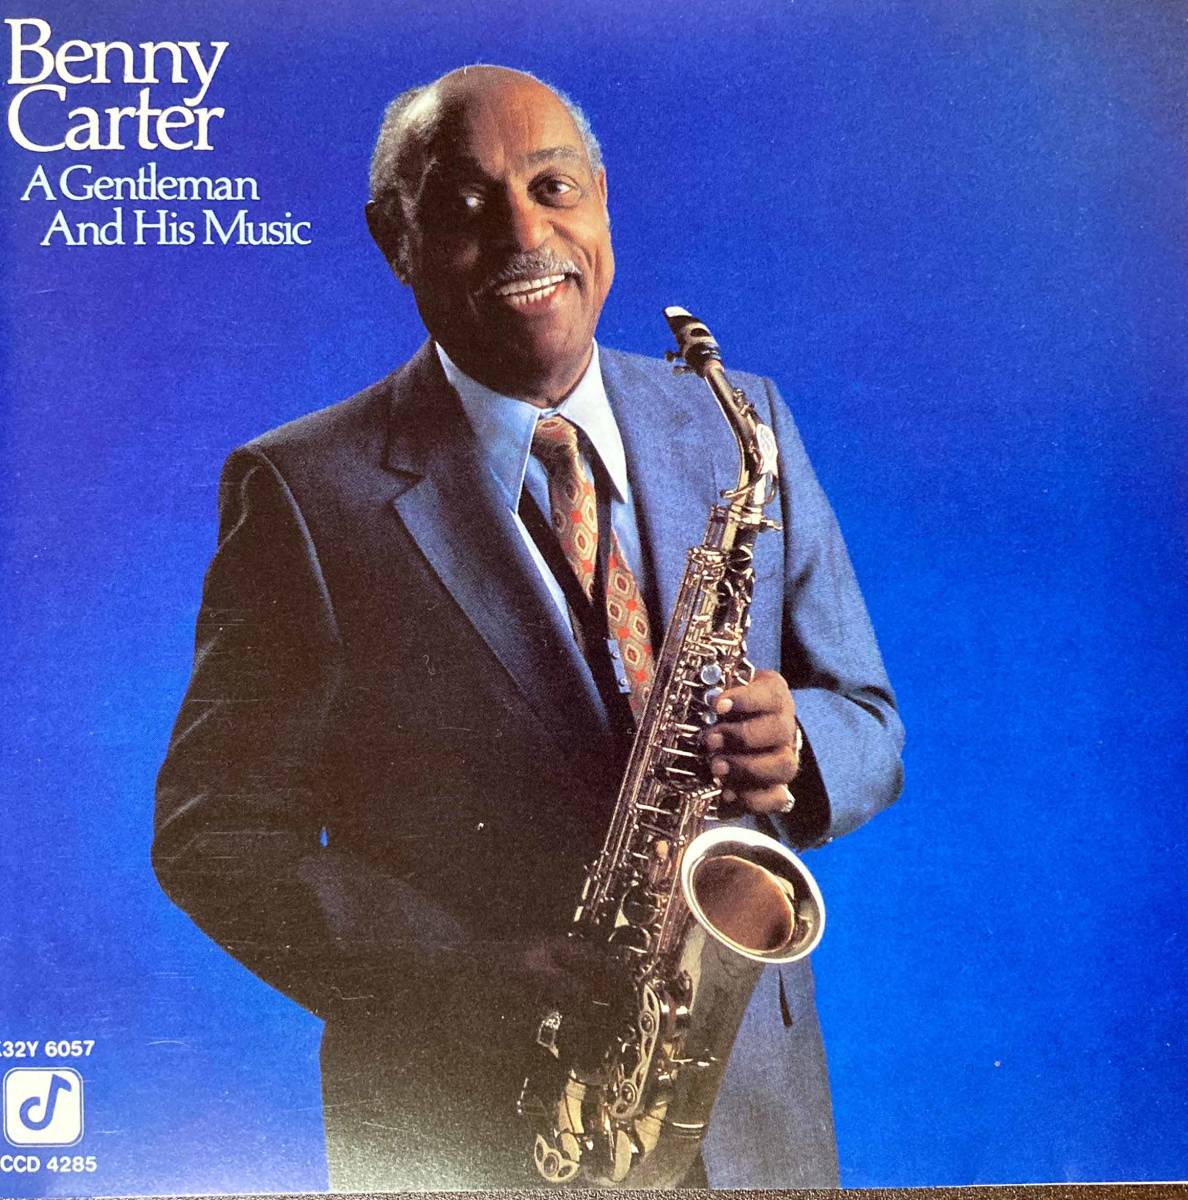 Benny Carter / A Gentleman and His Music 中古CD　国内盤　帯付き_画像1